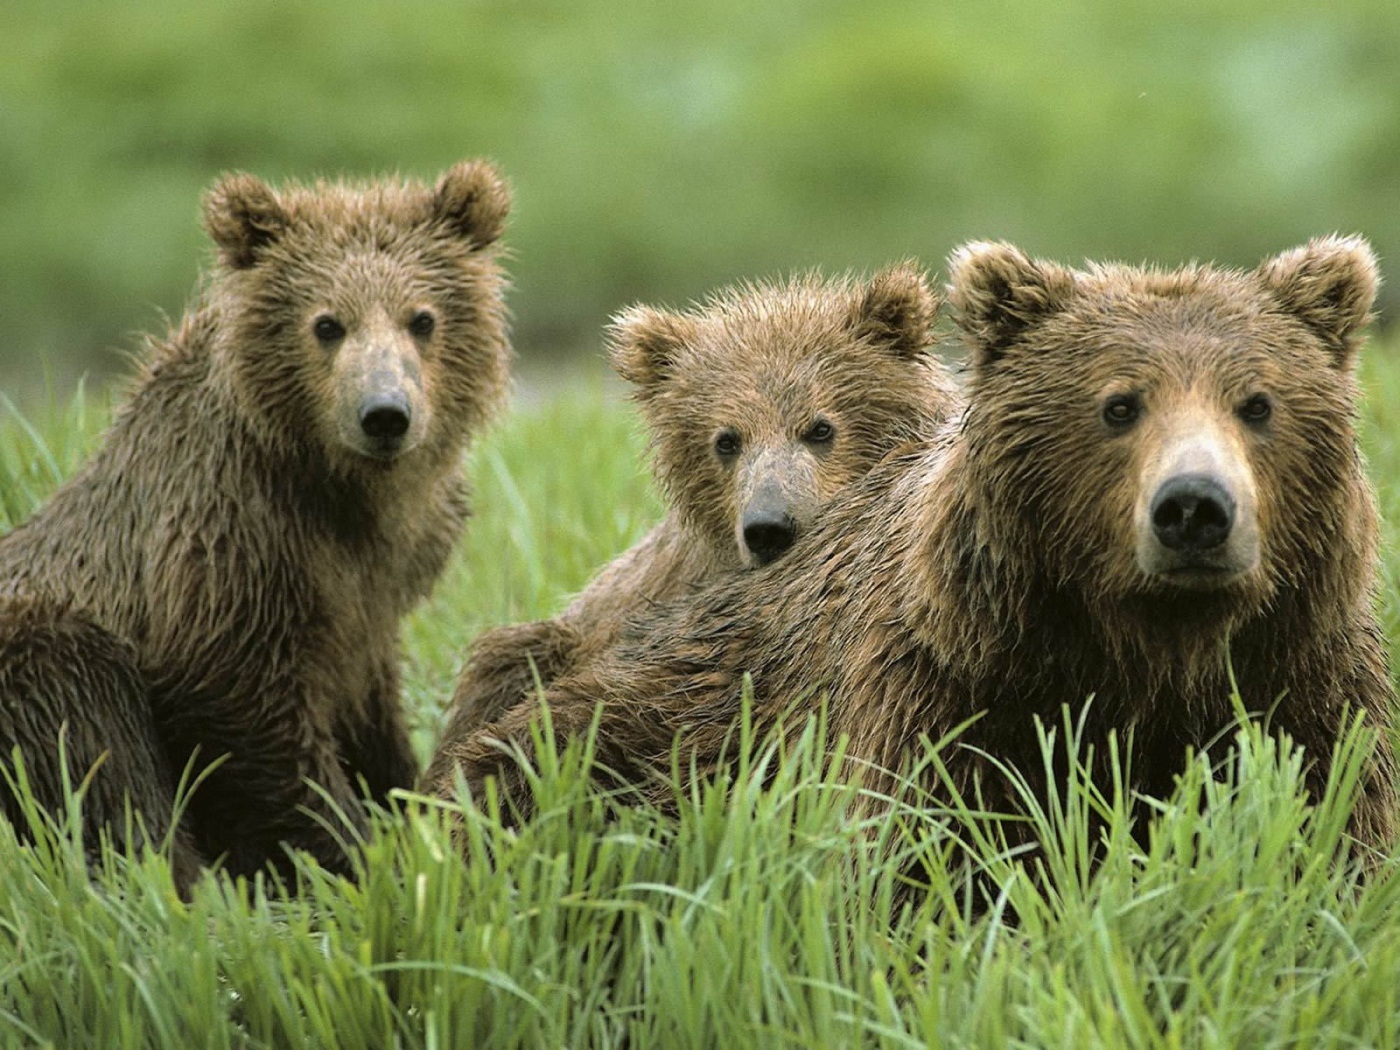 The family of brown bears